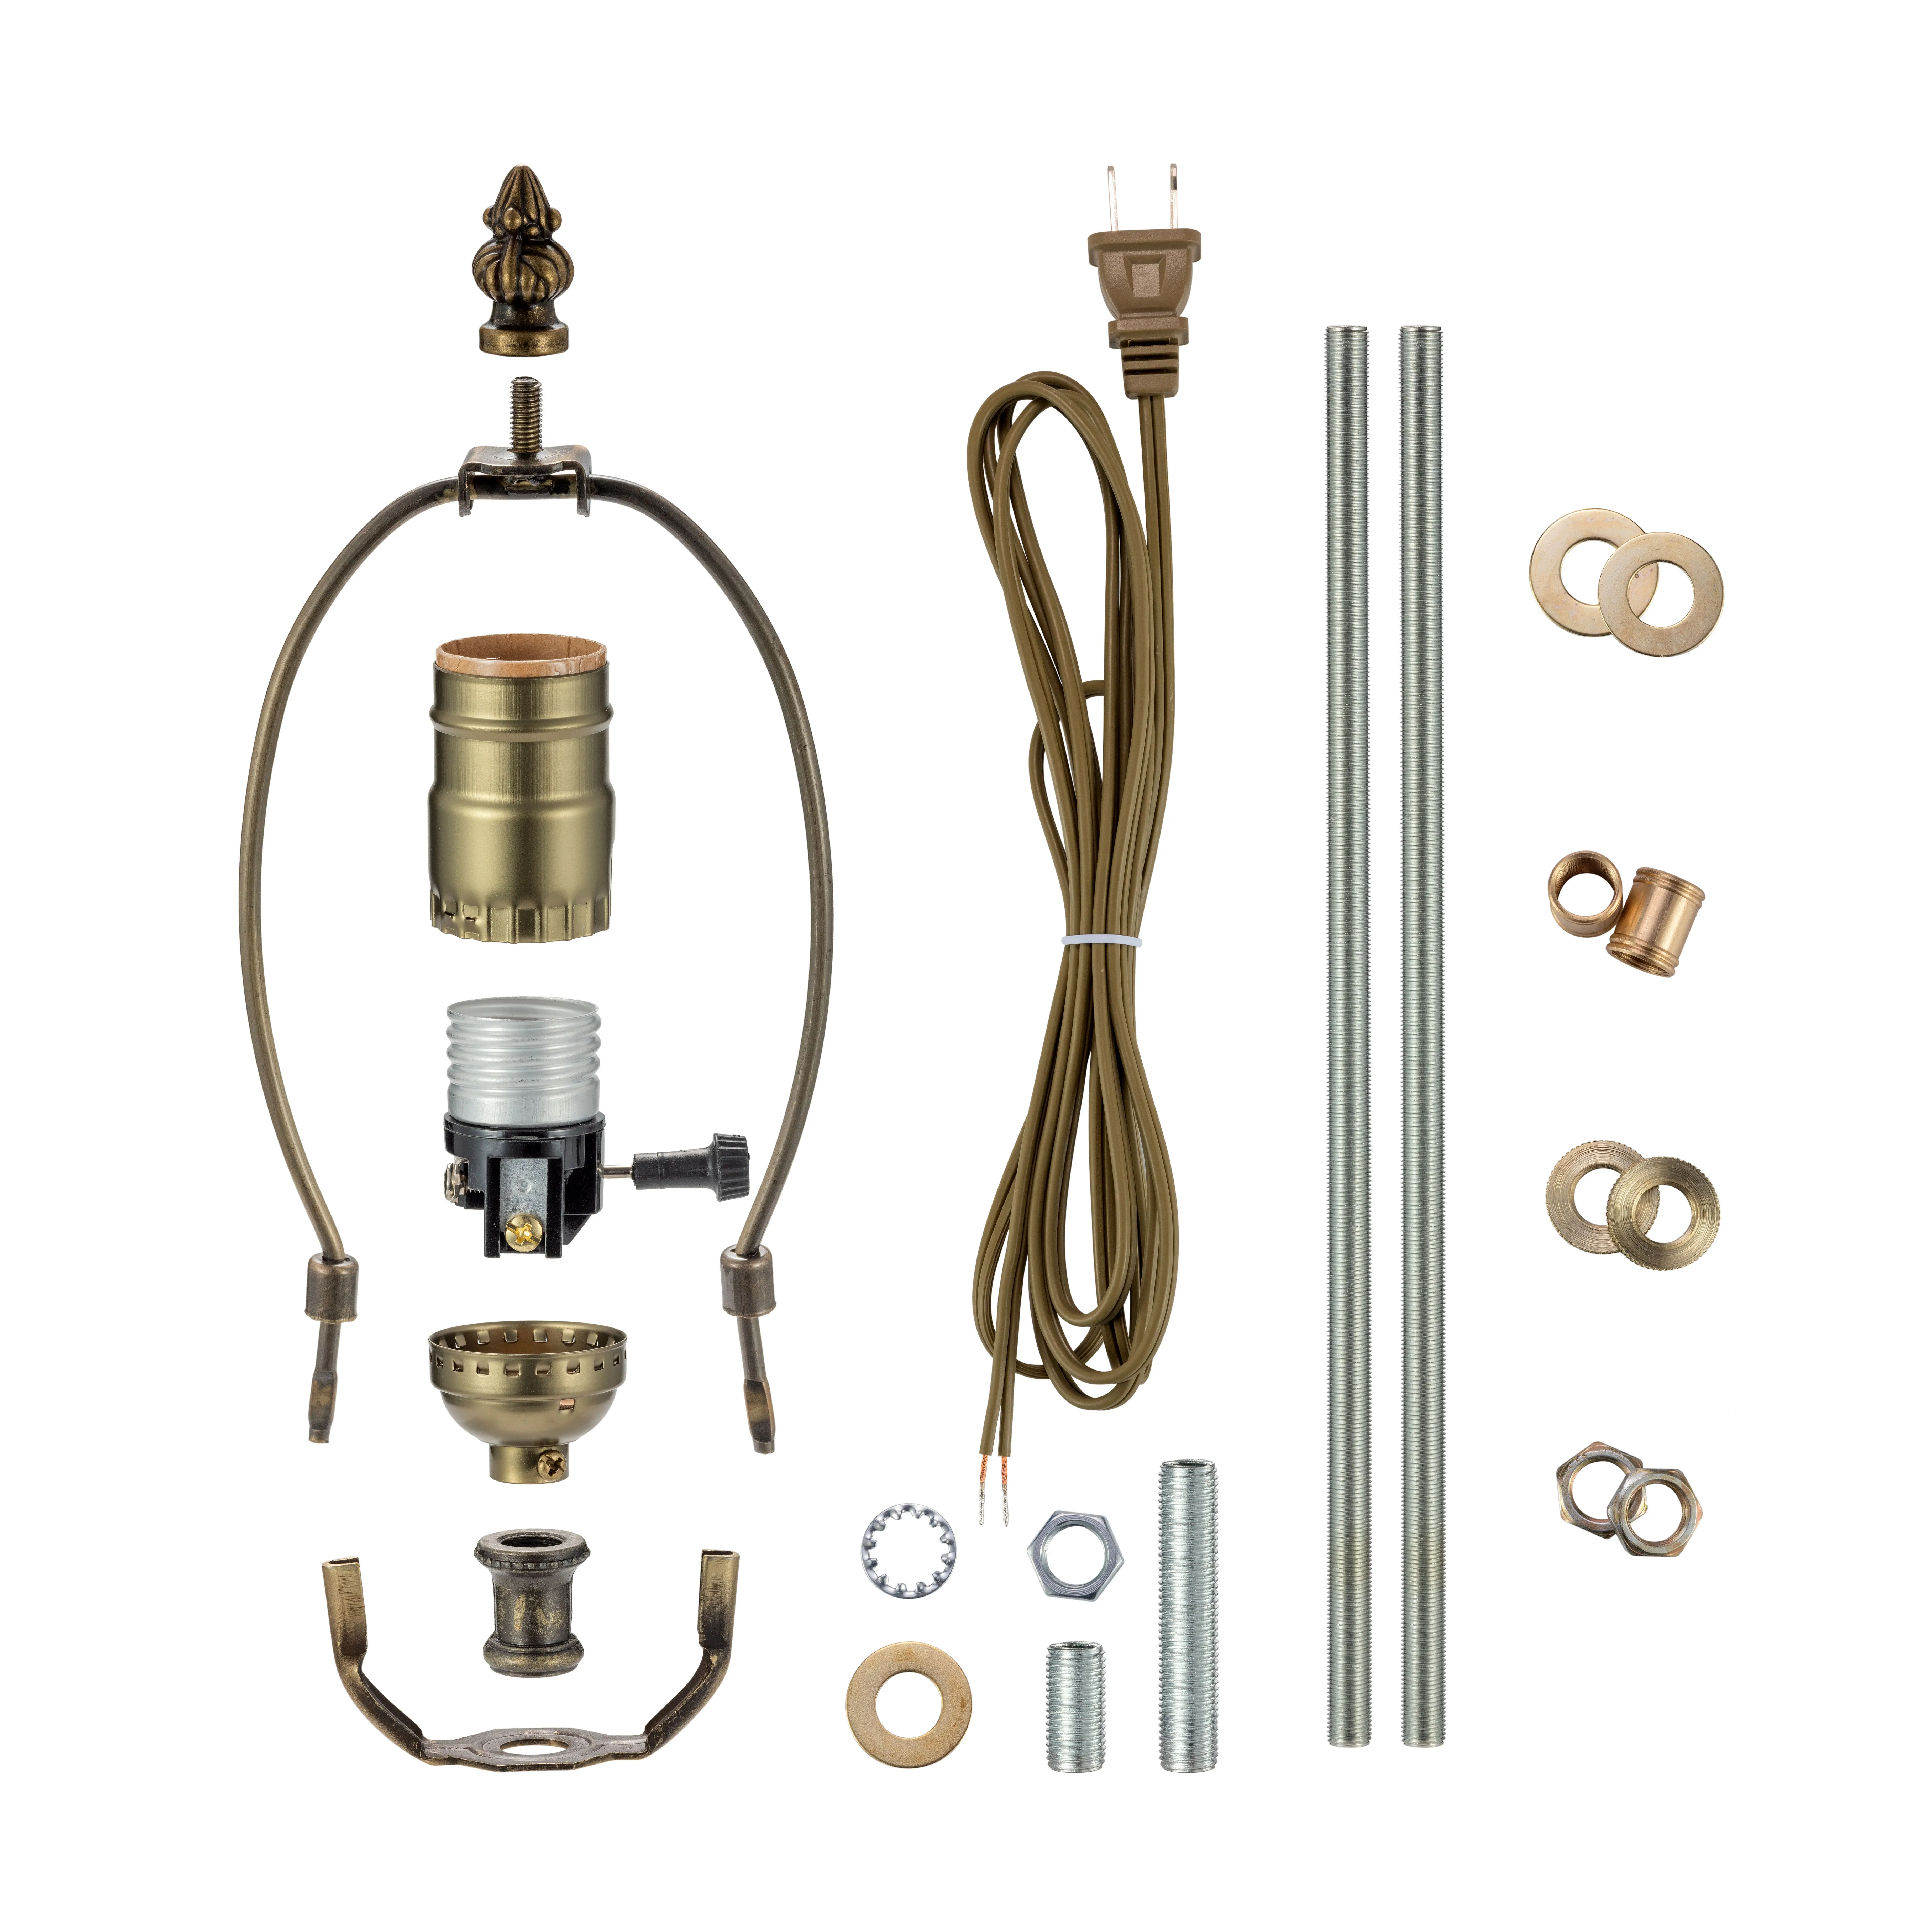 Lamp Wiring Kit Creative Hobbies Make-A-Lamp Kit with All Parts Needed and Instructions for DIY Lamp Design or Repair